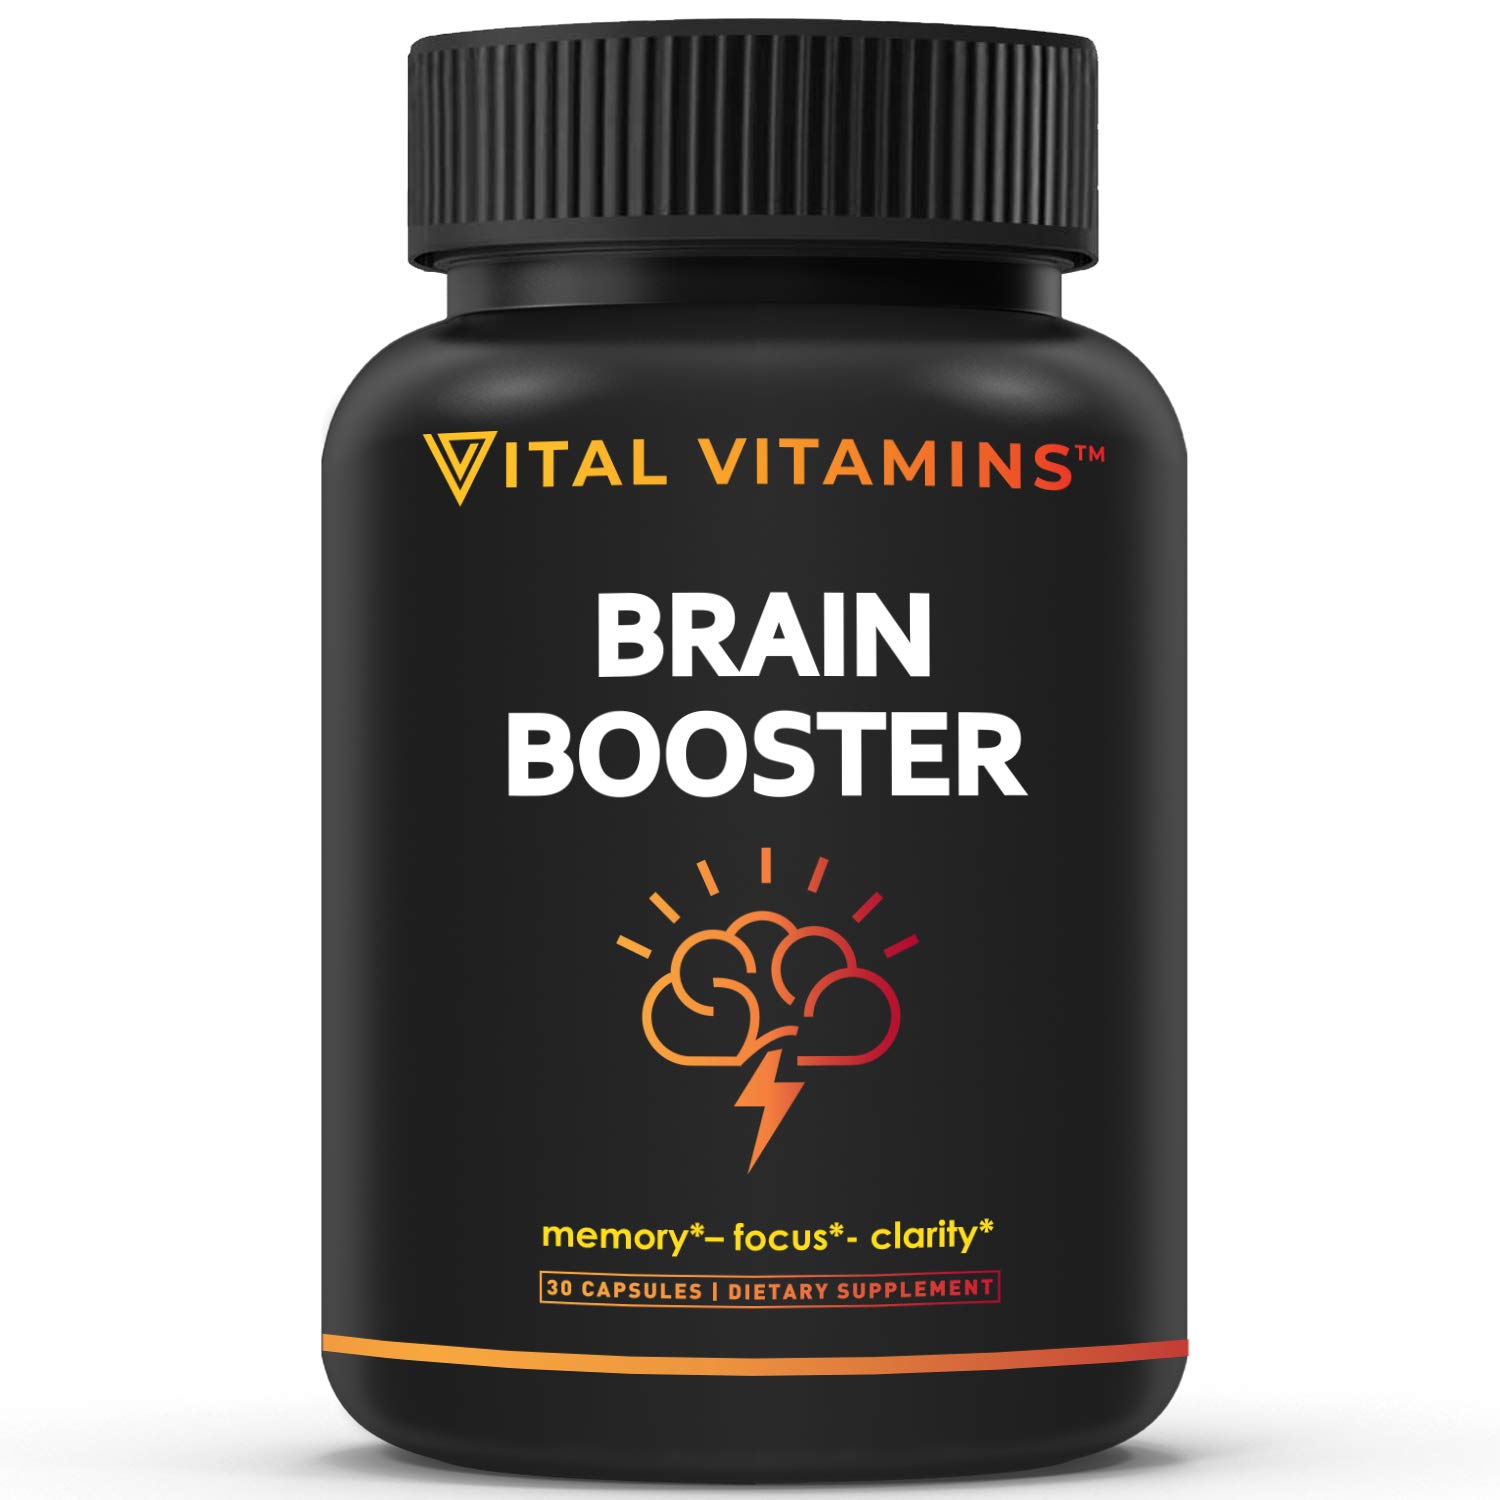 Book Cover Vital Vitamins Brain Supplements for Memory & Focus - Brain Booster Nootropic - Brain Support for Concentration & Brain Fog - with Ginkgo Biloba, DMAE, Vitamin B12 - Energy Pills - 30-Day Supply Original 30 Count (Pack of 1)